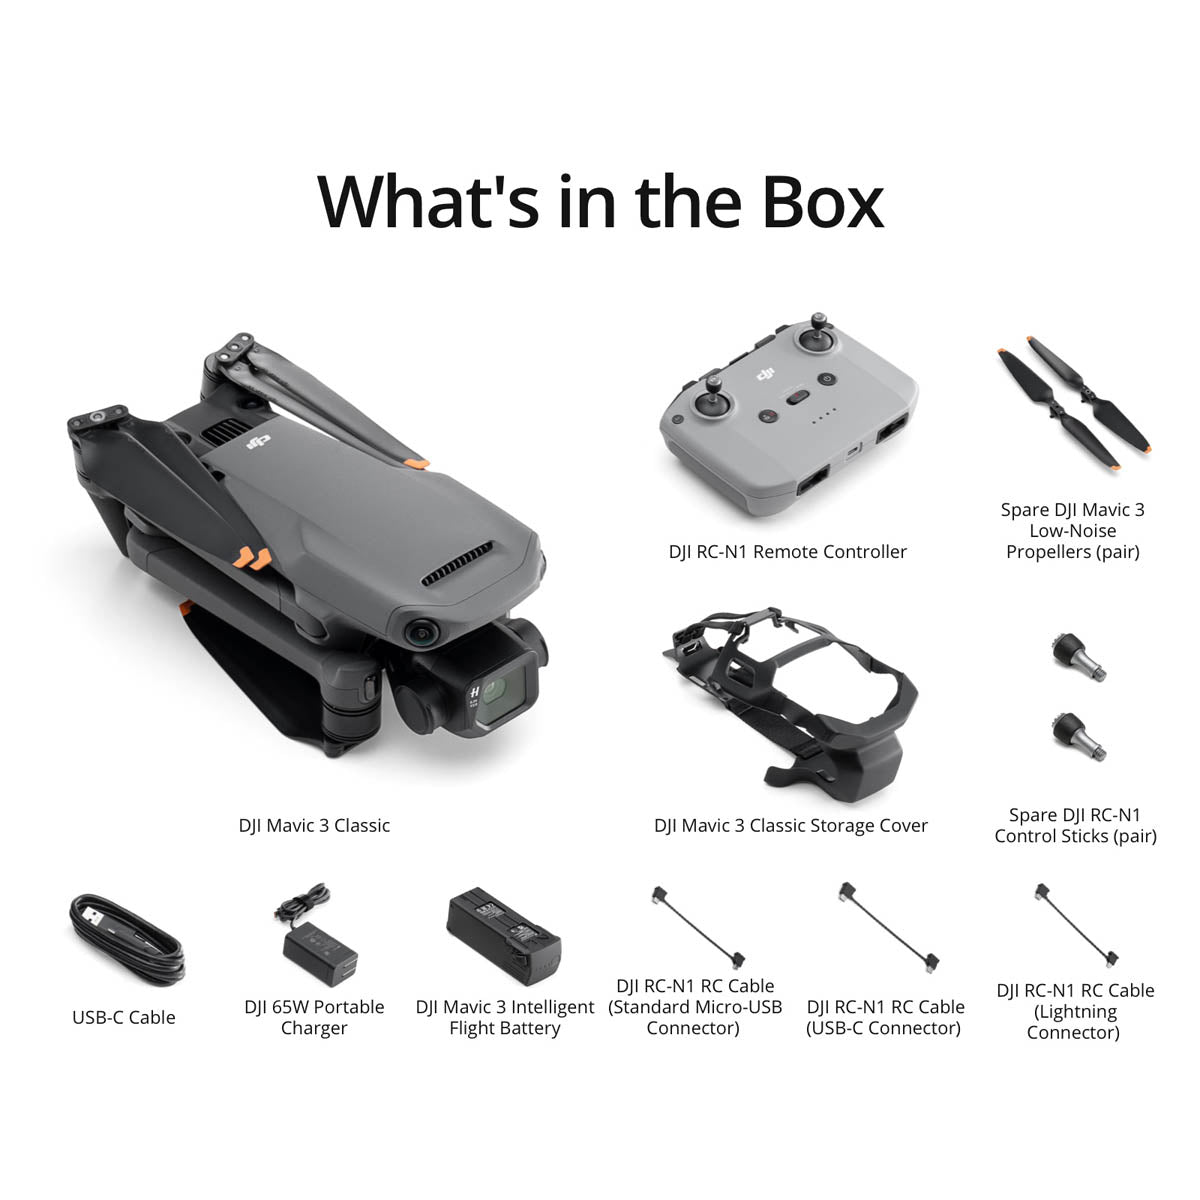 DJI Mavic 3 - Battery charger with storage mode - Drone Parts Center